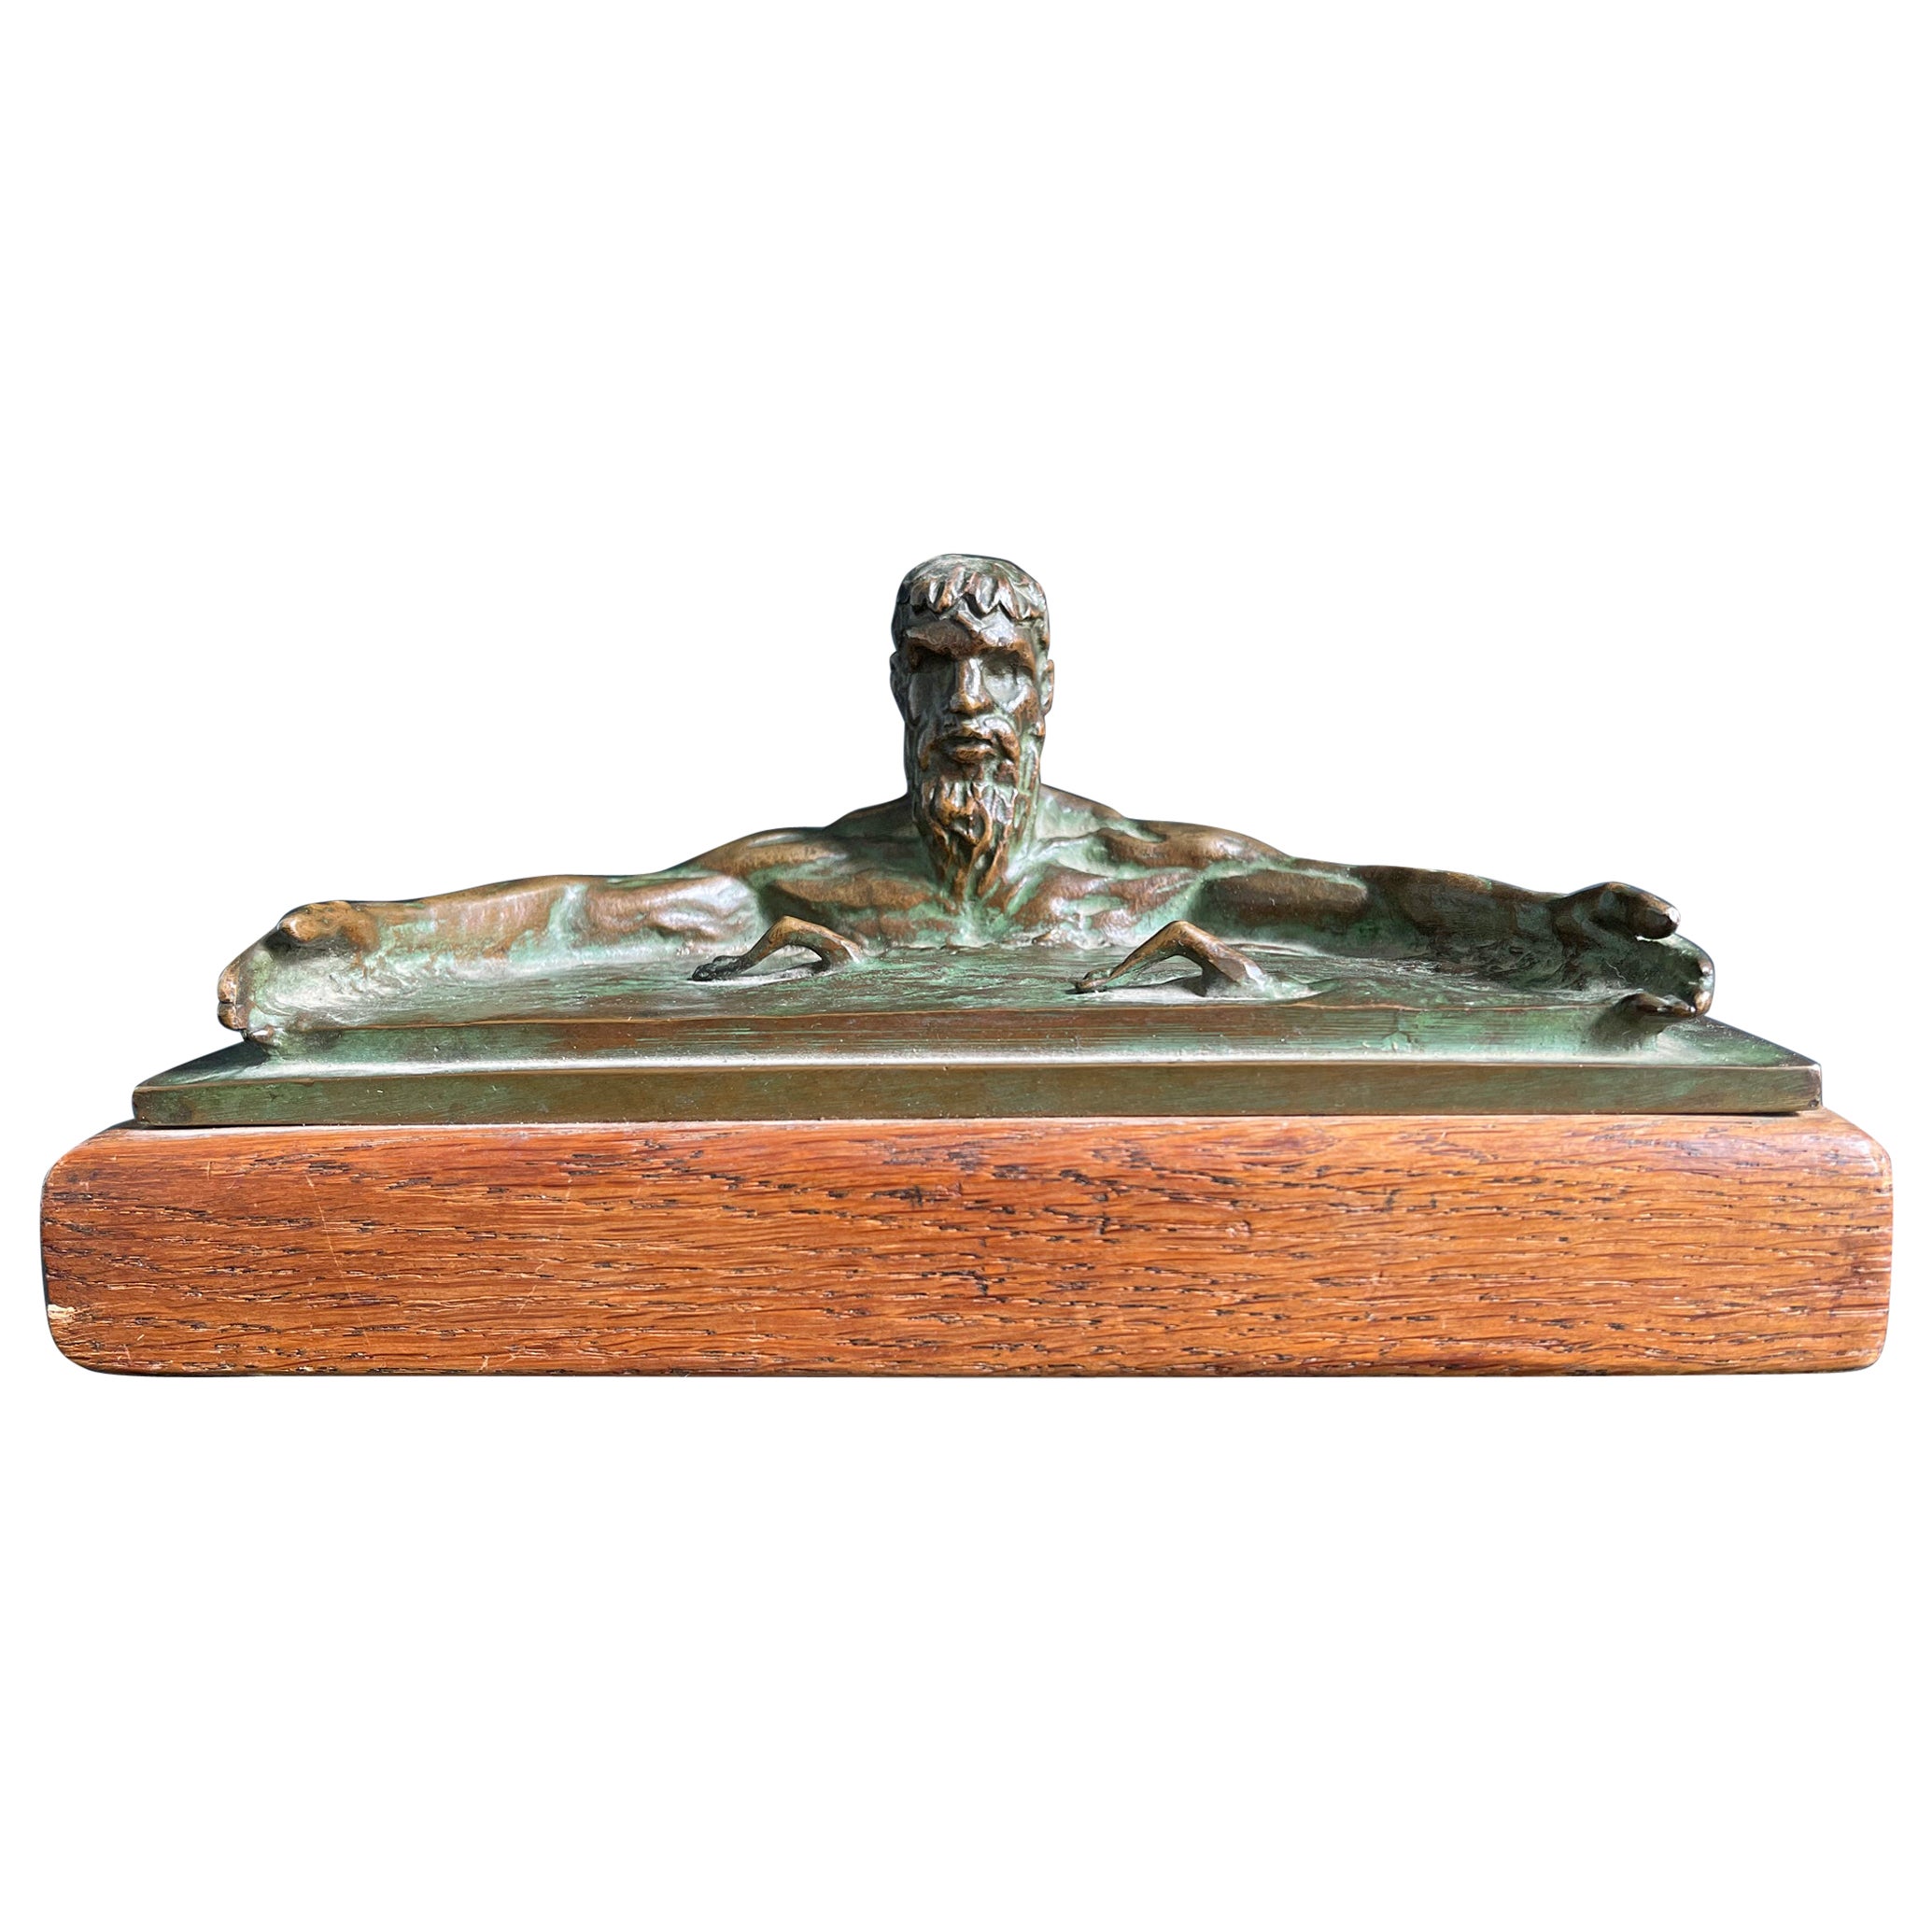 "Poseidon Calming the Sea, " Sculpture w/ Swimmers by Joe Brown Awarded by AAU For Sale